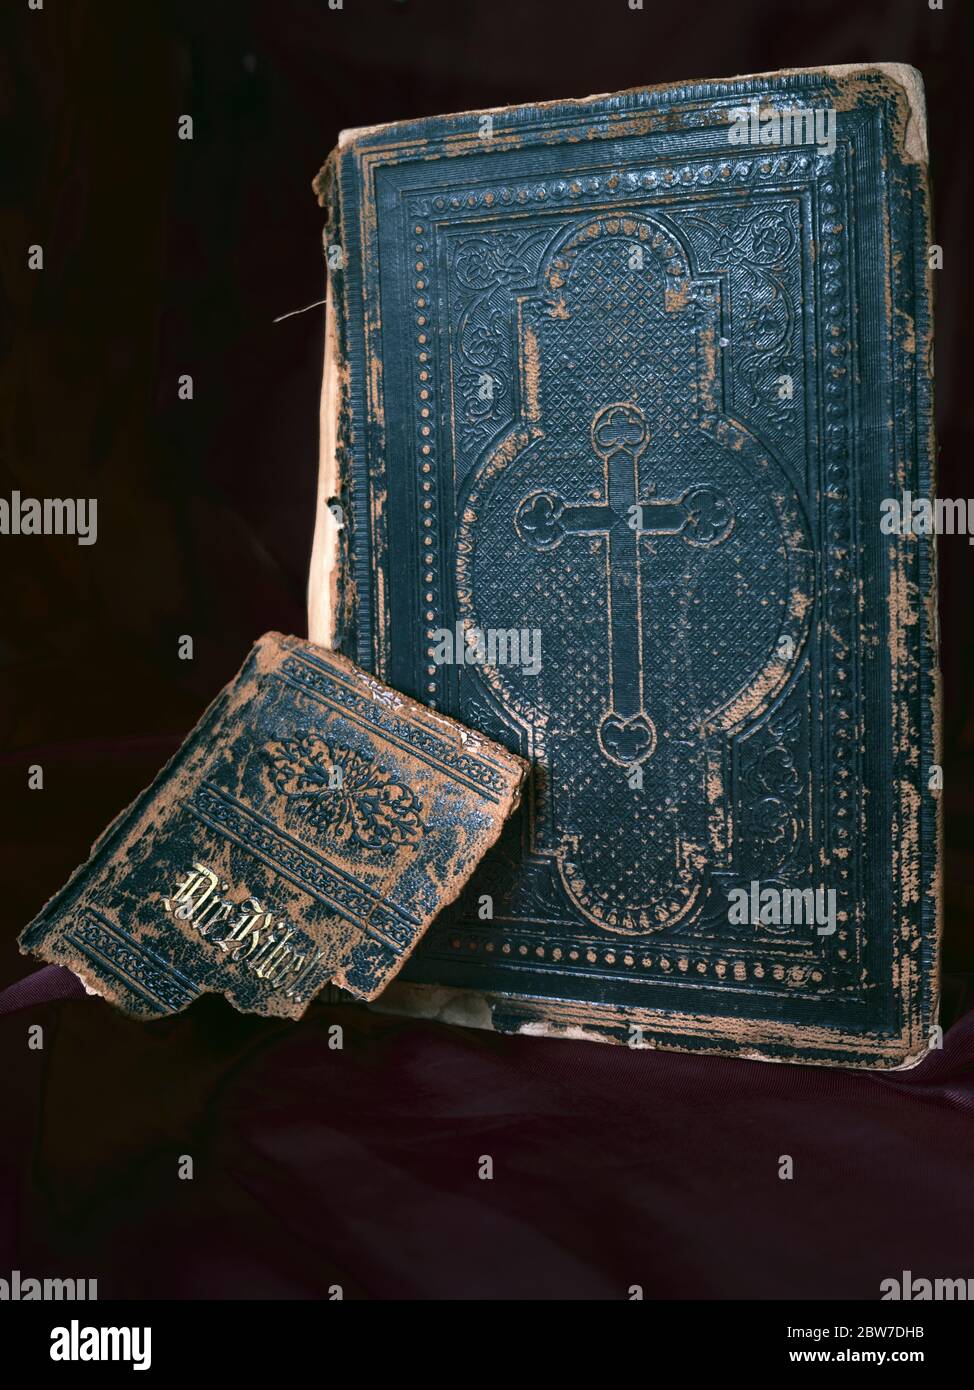 Antique leather book cover background. Stock Photo